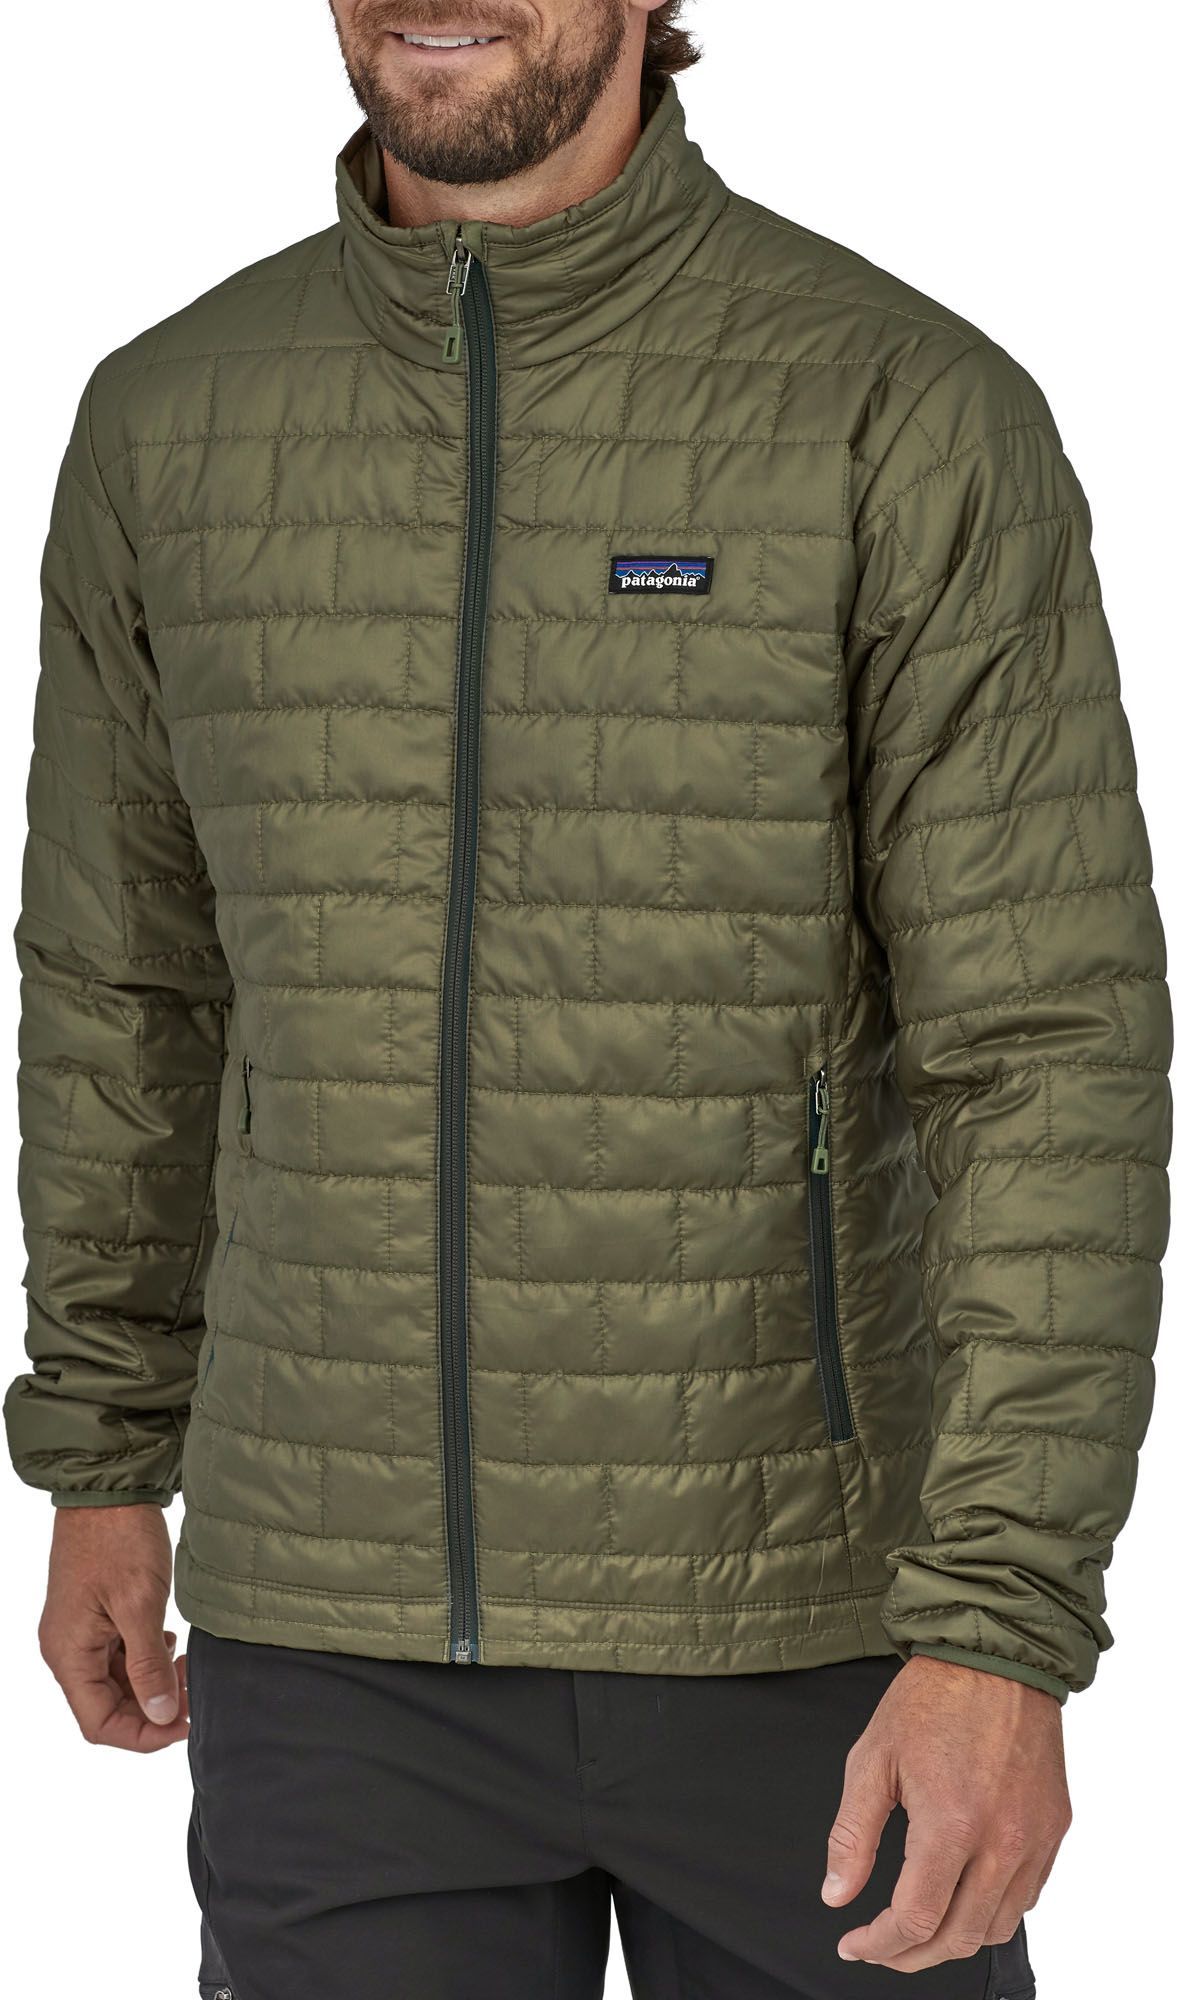 Patagonia Men's Nano Puff Jacket, Size: Small, Industrial Green | Dick's Sporting Goods